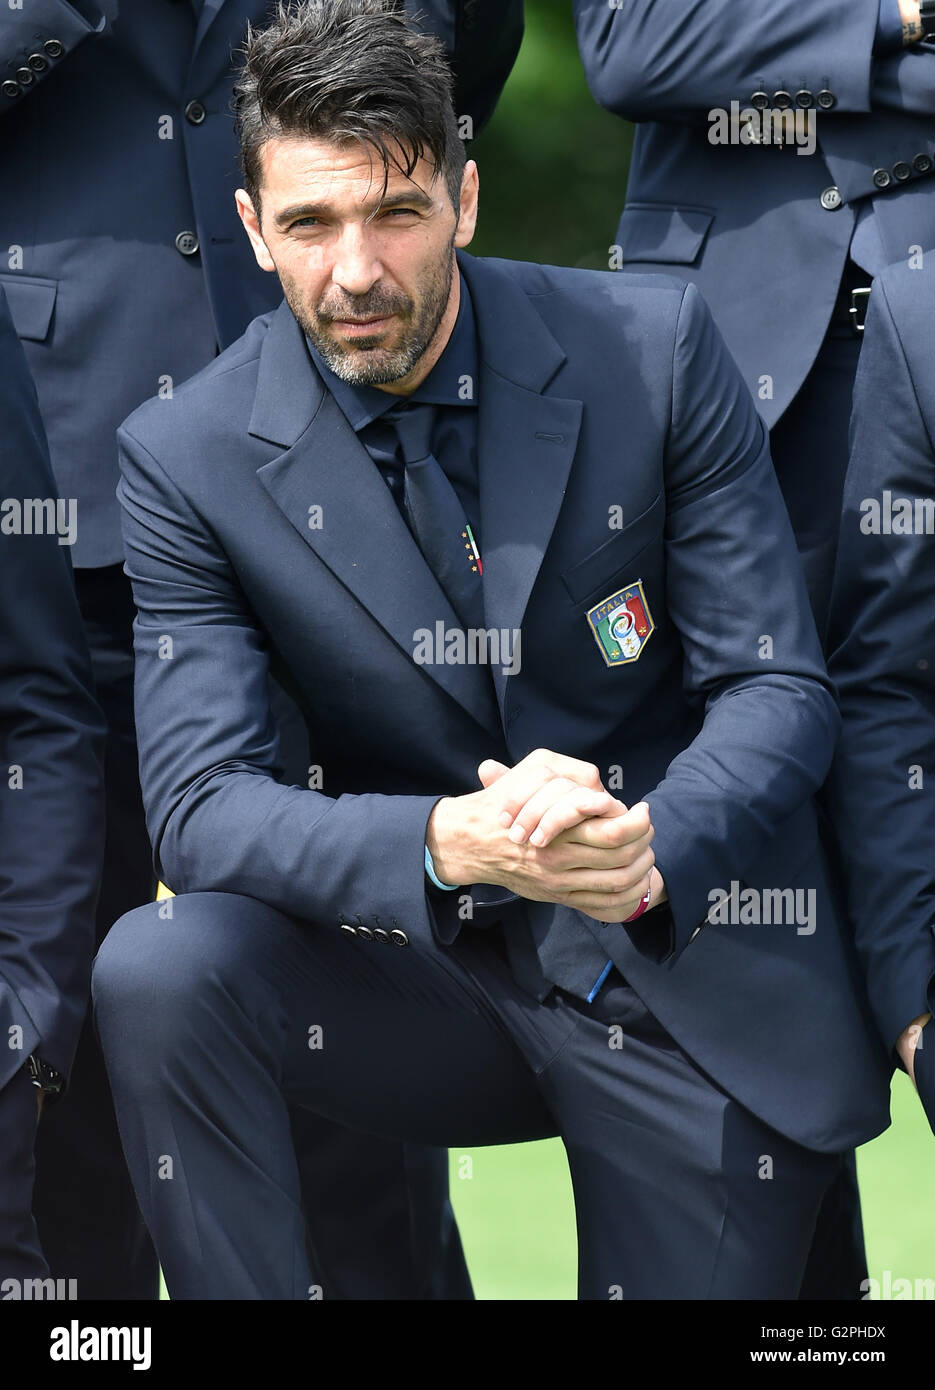 Florence, Italy. 1st June, 2016. Italian national soccer team goalkeeper Gianluigi Buffon reacts during their official team photo shooting at the Coverciano training center, near Florence, Italy, June 1, 2016. © Alberto Lingria/Xinhua/Alamy Live News Stock Photo